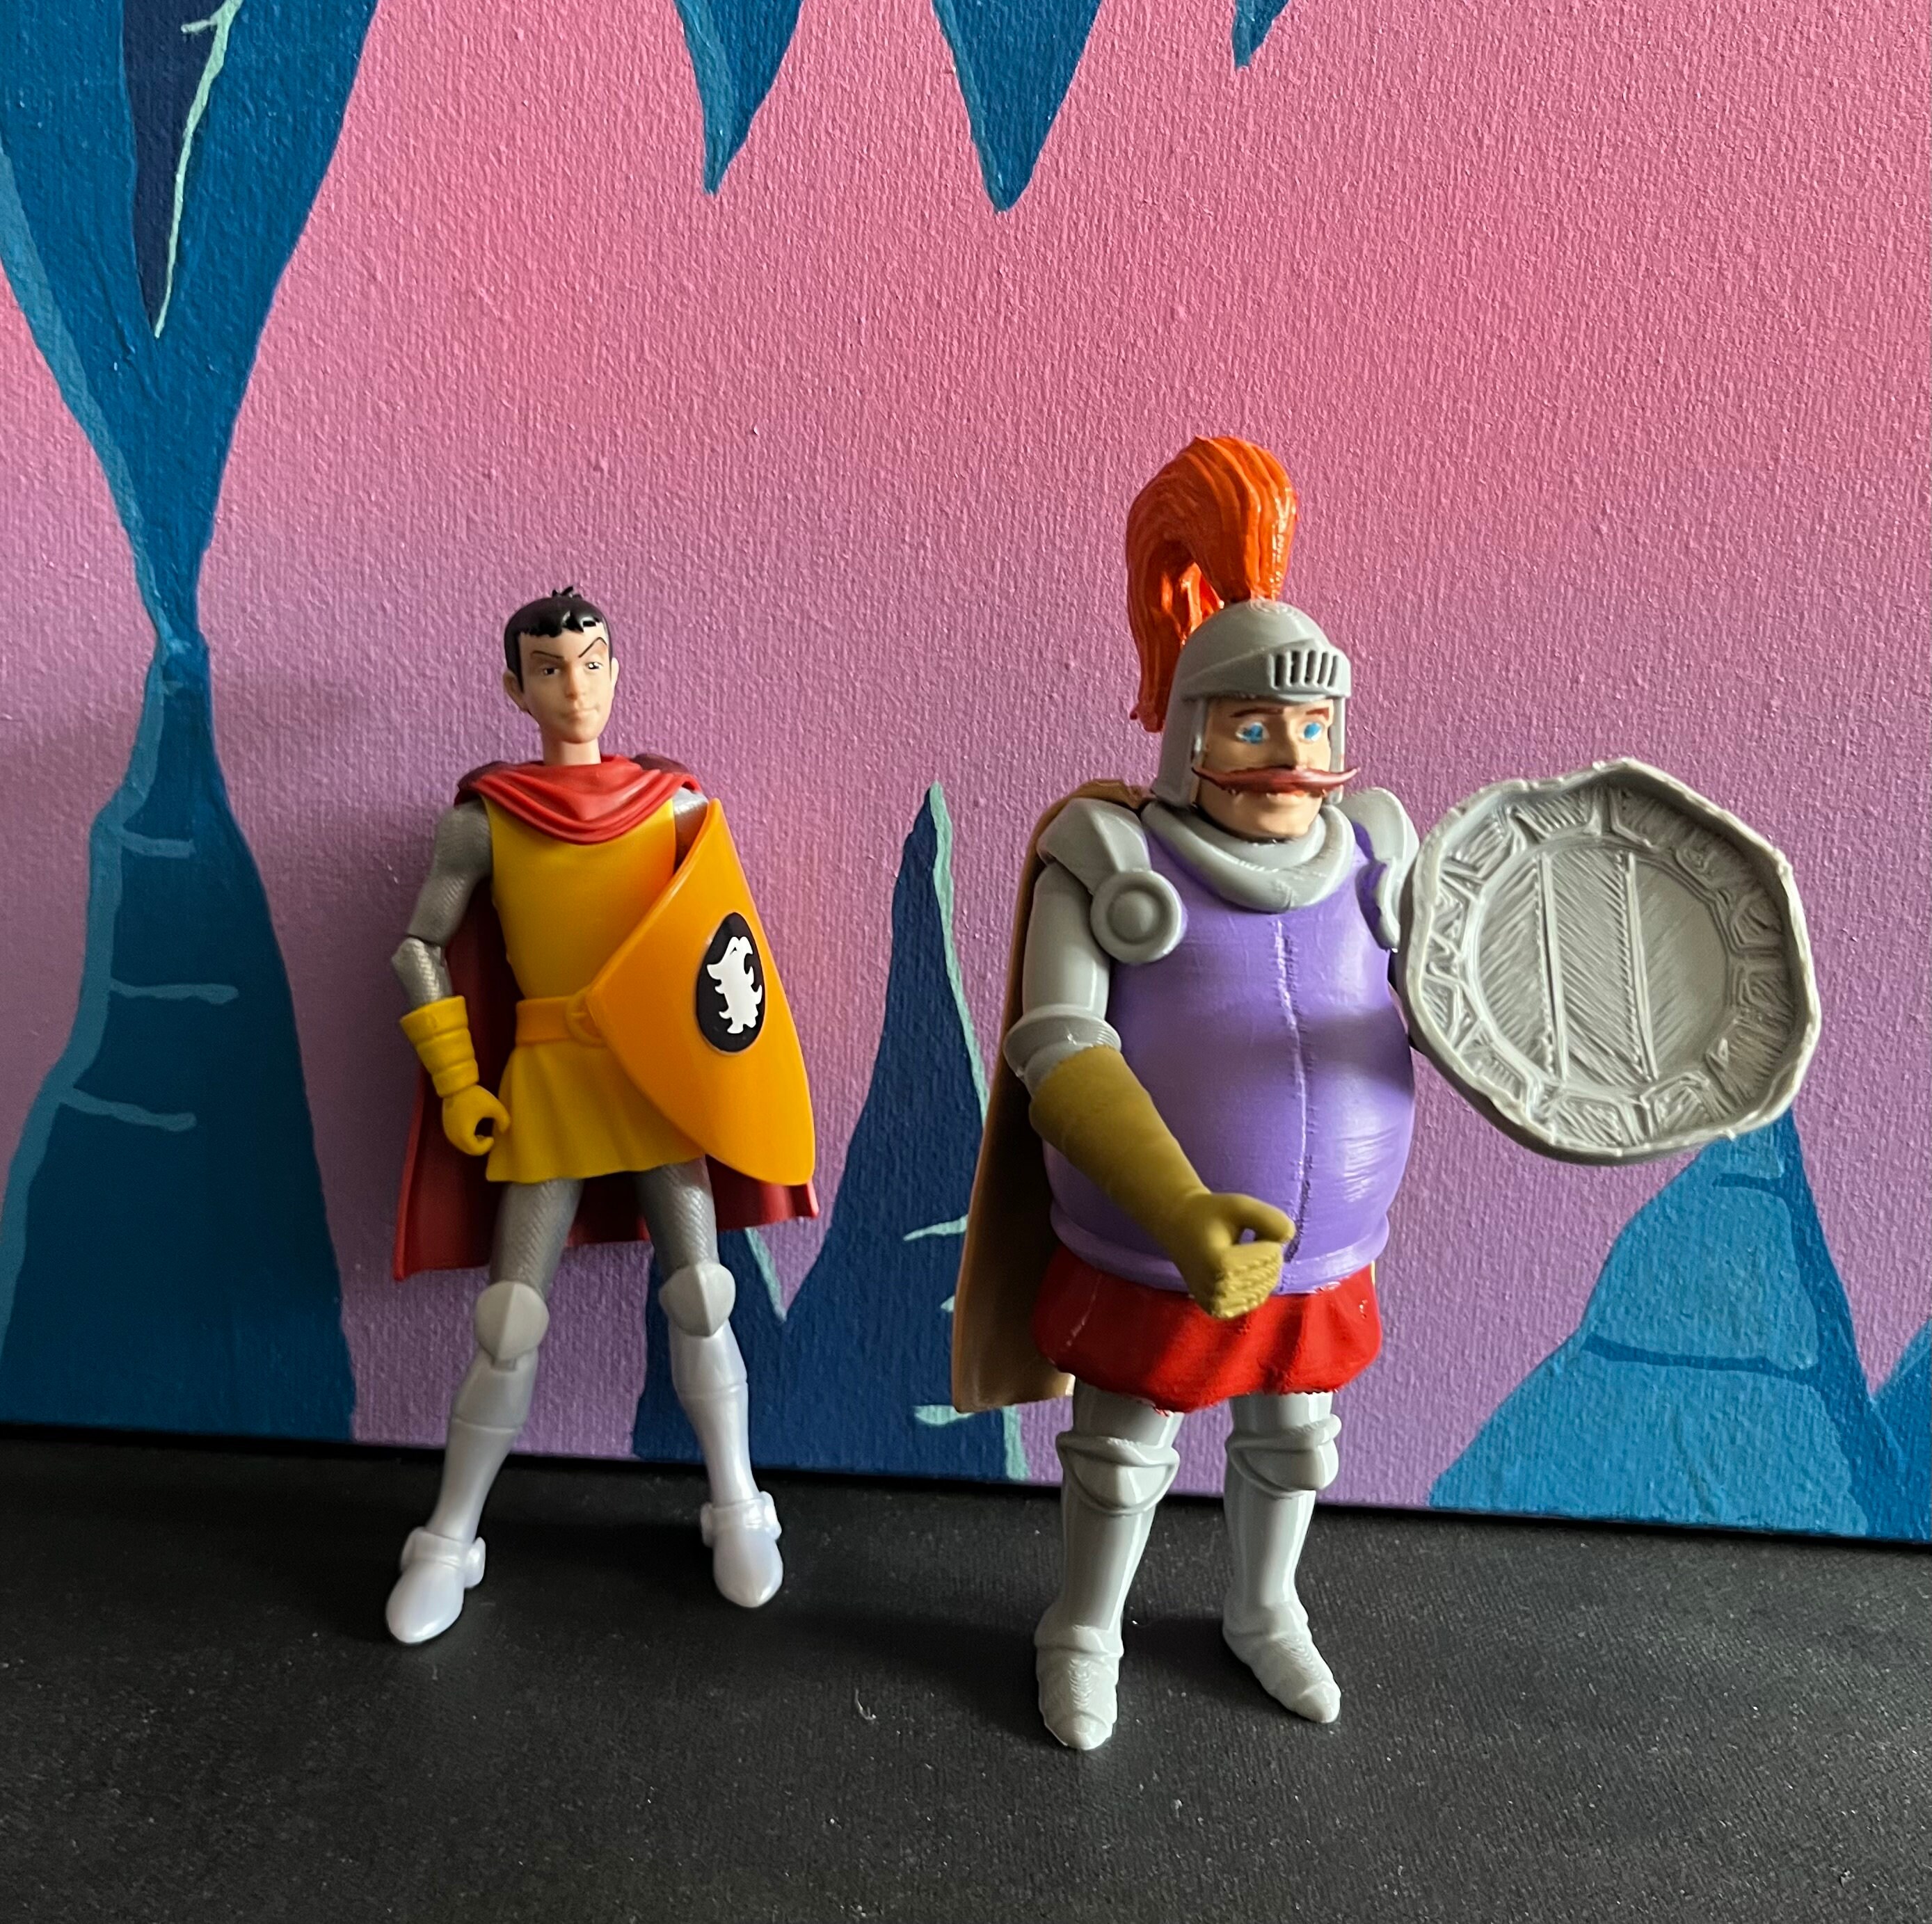 Dungeons & Dragons (Cartoon Classics): Dungeon Master and Venger by Hasbro